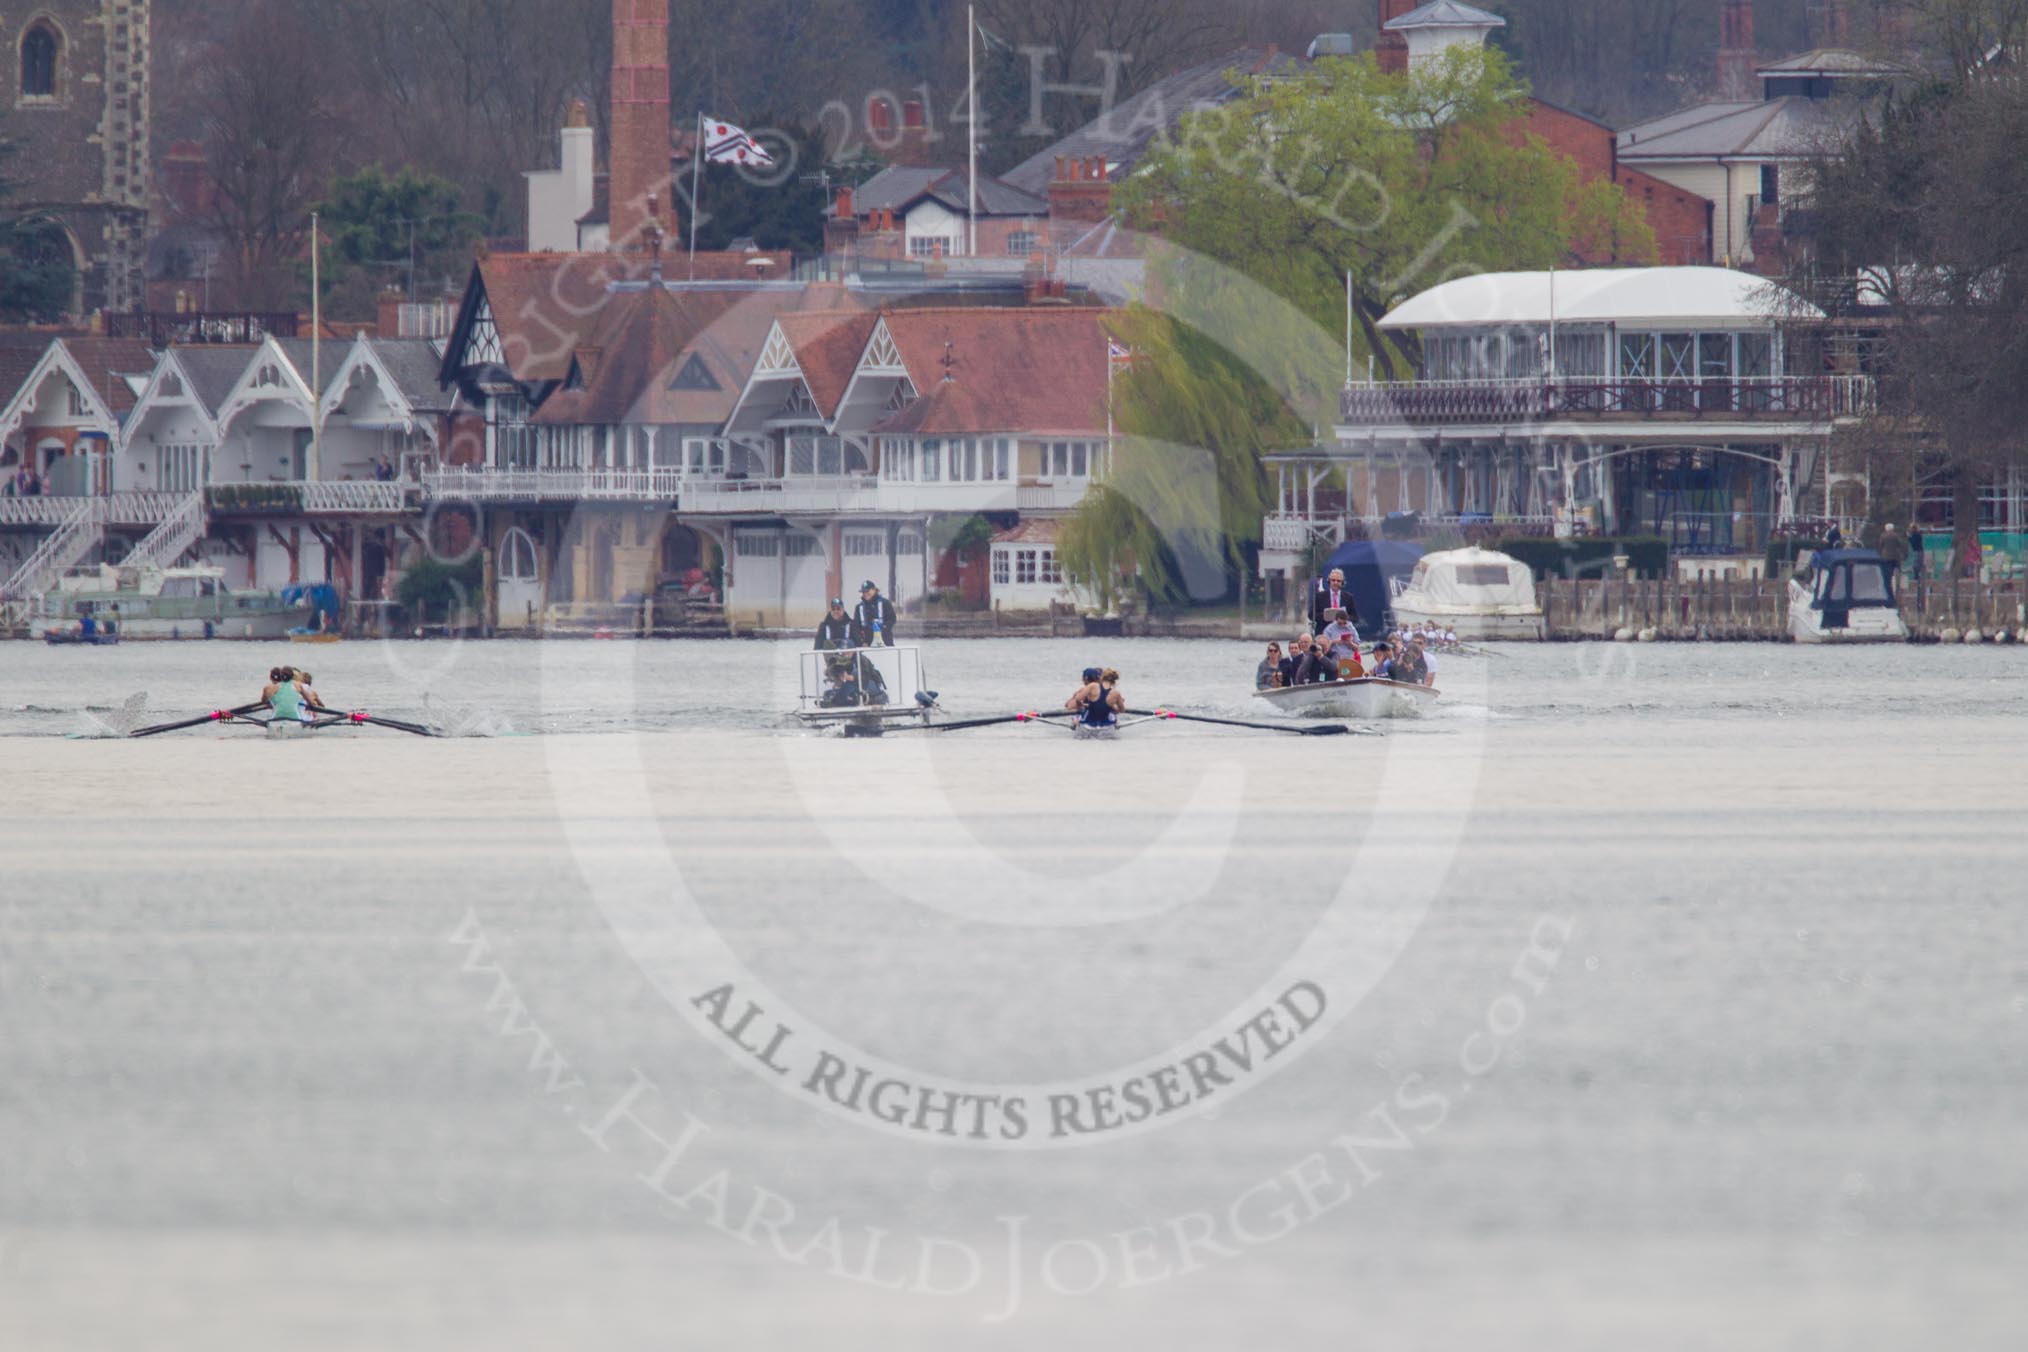 The Women's Boat Race and Henley Boat Races 2014: The Lightweight Women's Boat Race - OUWLRC (on the right) v. CUWBC (on the left)..
River Thames,
Henley-on-Thames,
Buckinghamshire,
United Kingdom,
on 30 March 2014 at 14:47, image #213